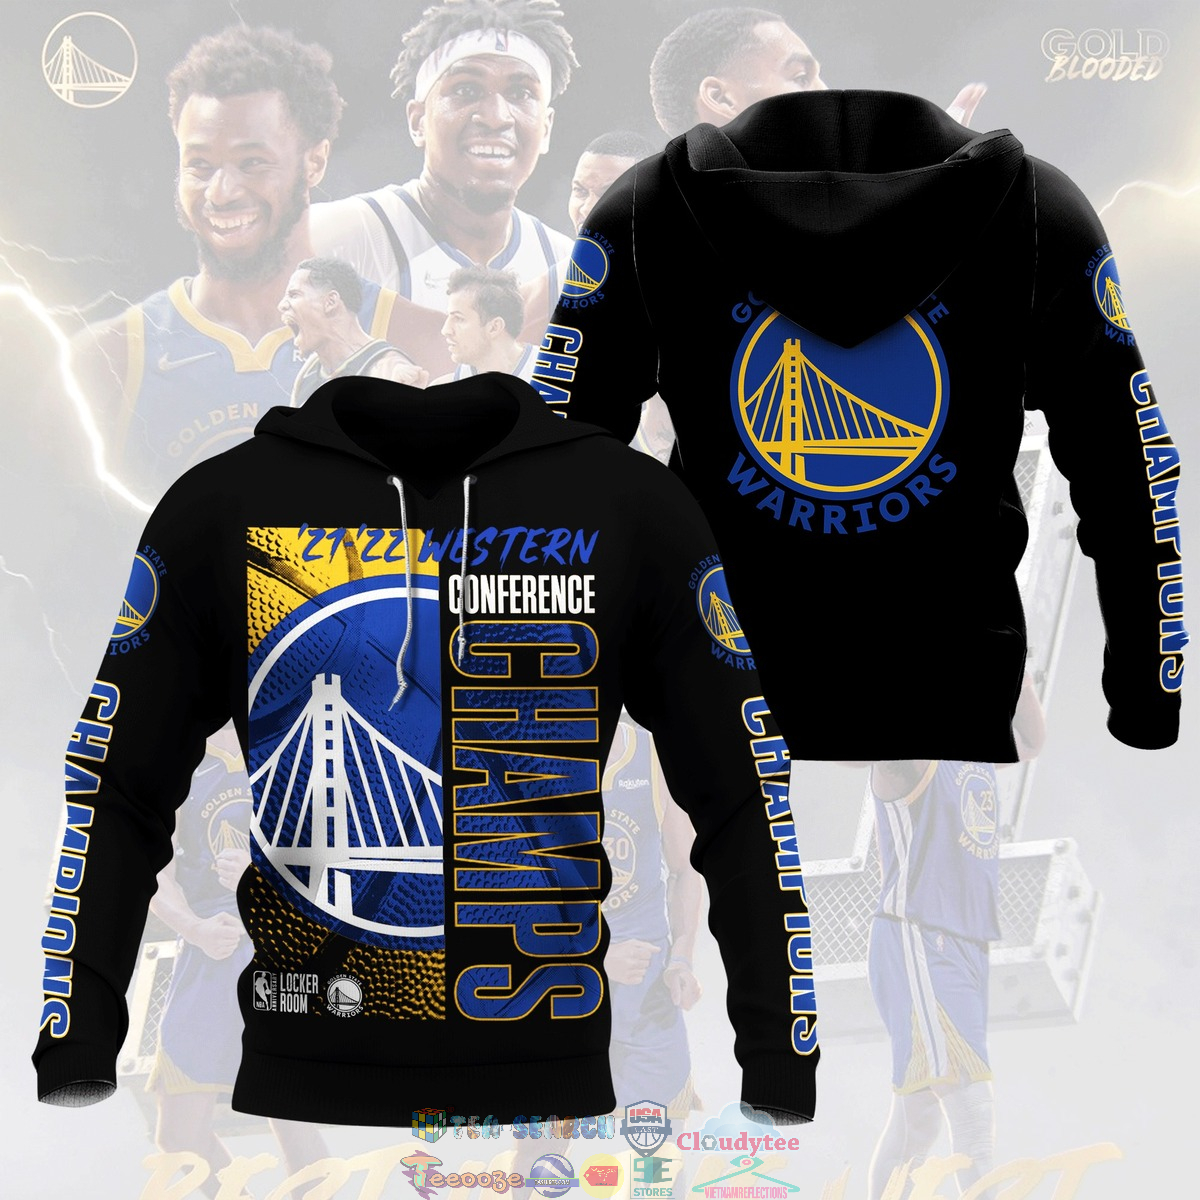 WWZ9FS2B-TH050822-55xxxGolden-State-Warriors-21-22-Conference-Champs-Black-3D-hoodie-and-t-shirt3.jpg